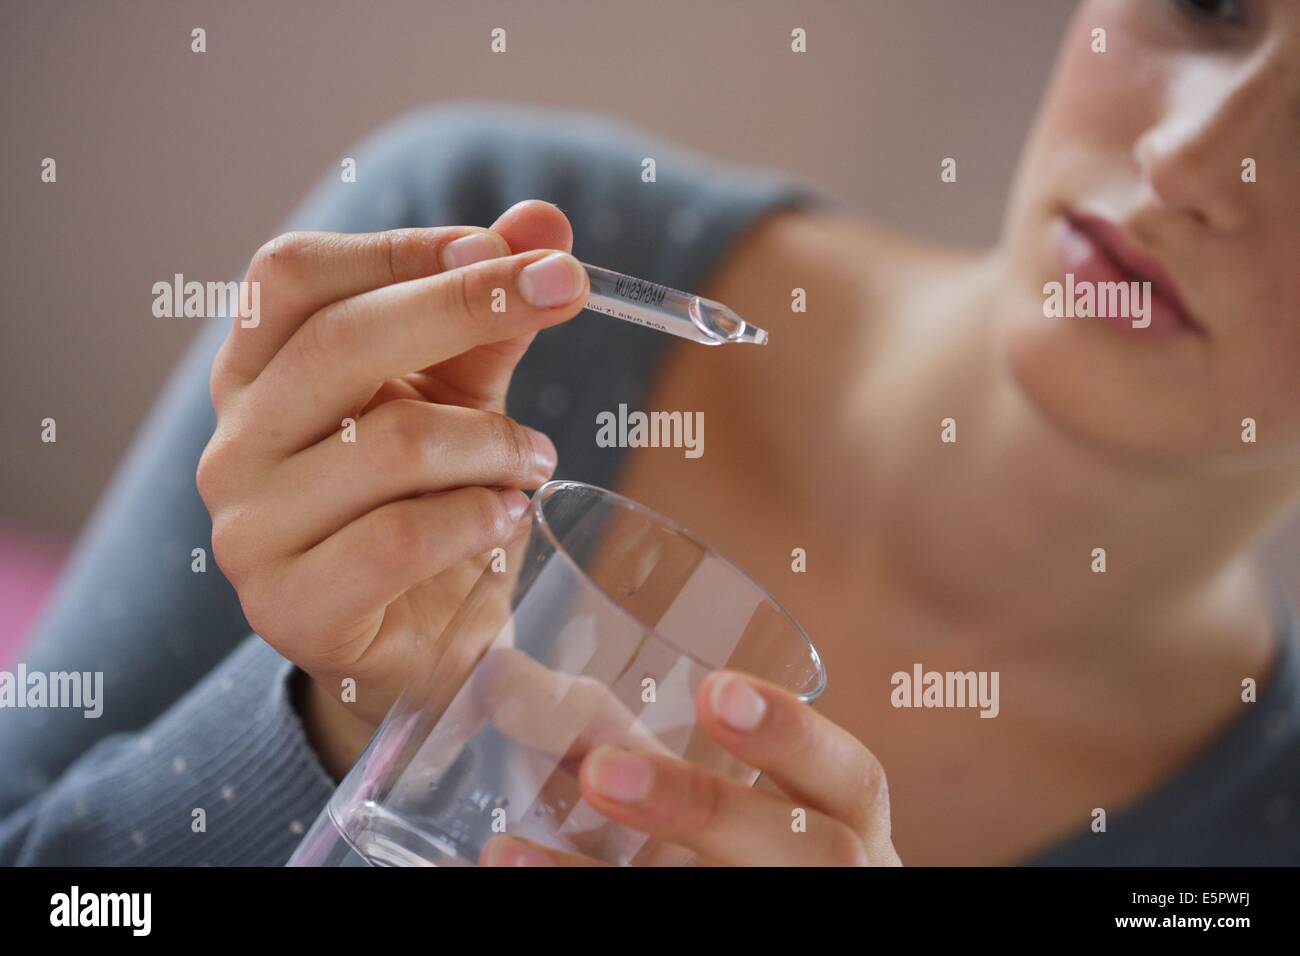 Woman taking a glass ampoule of trace elements (magnesium). Stock Photo